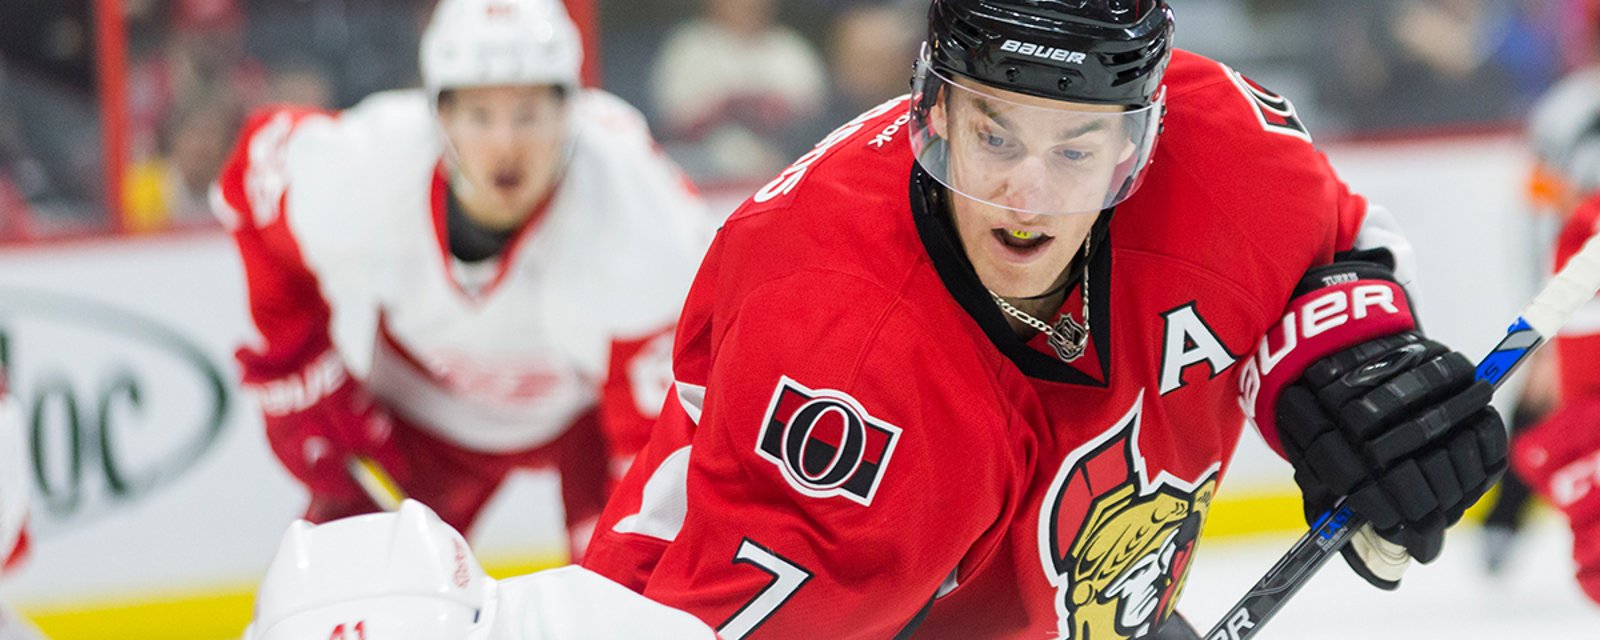 Rumor: A new team enters the Turris Sweepstakes